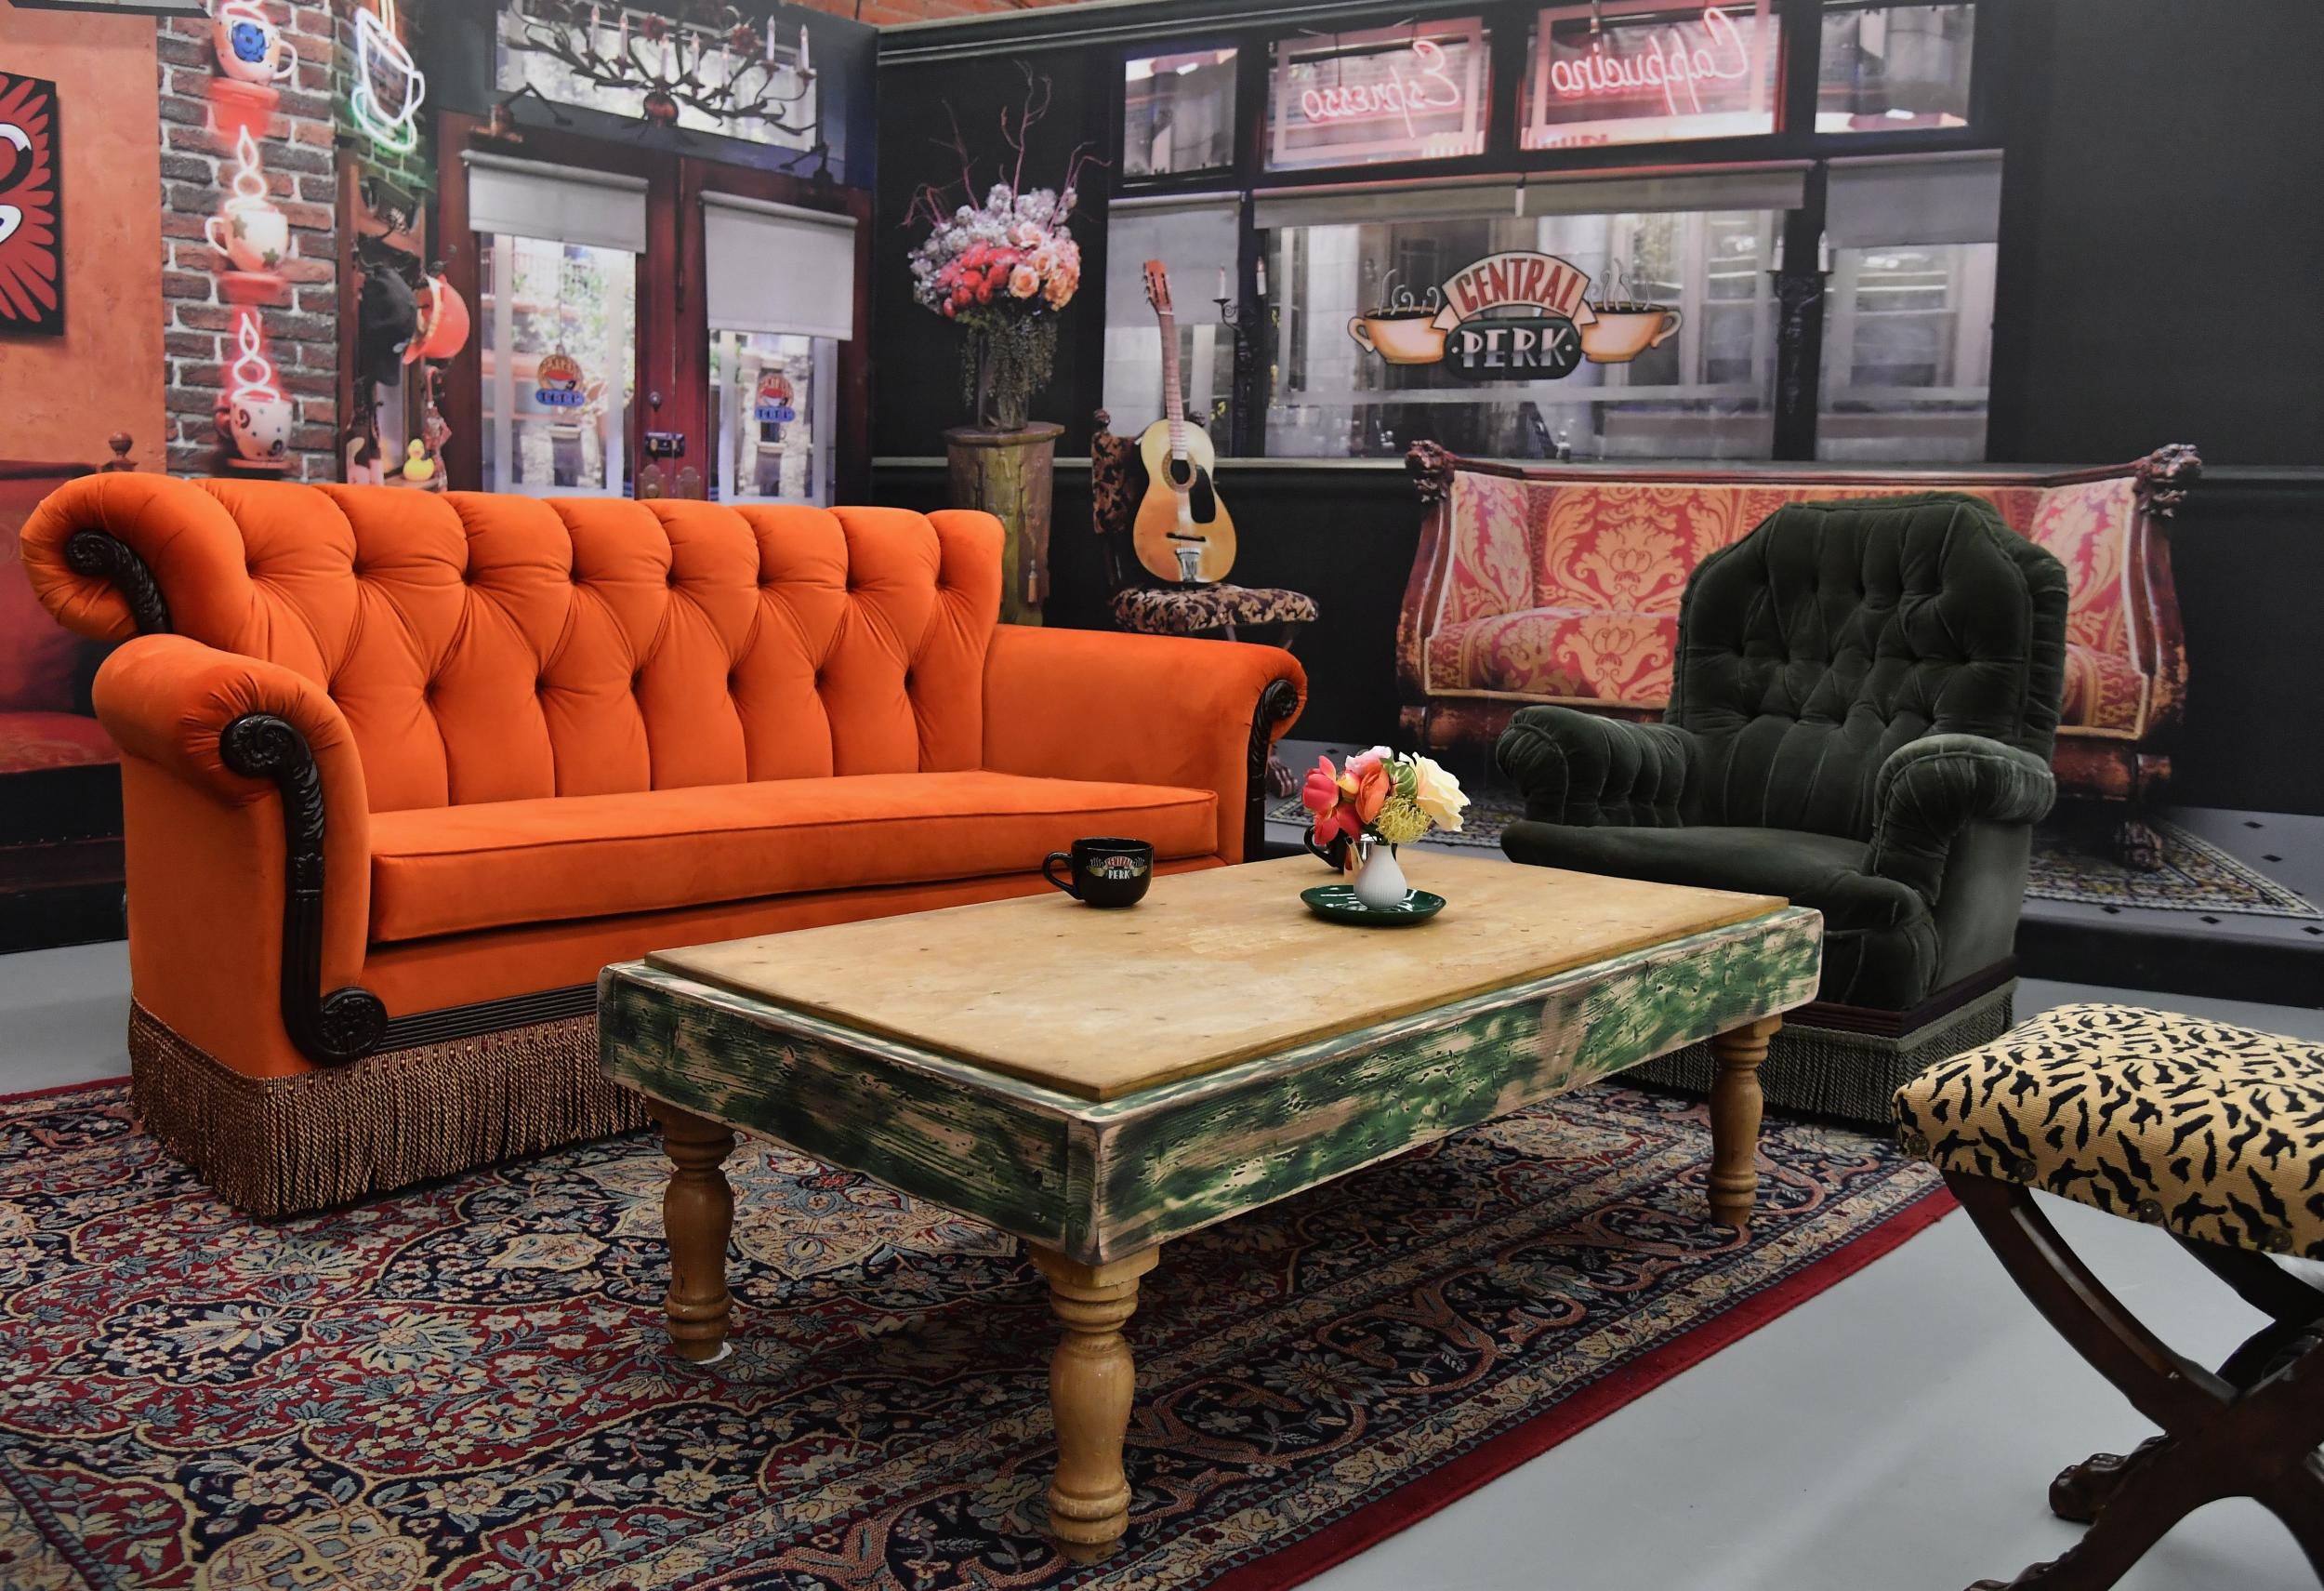 Friends' Experience Opens in New York City Sparking TV Nostalgia